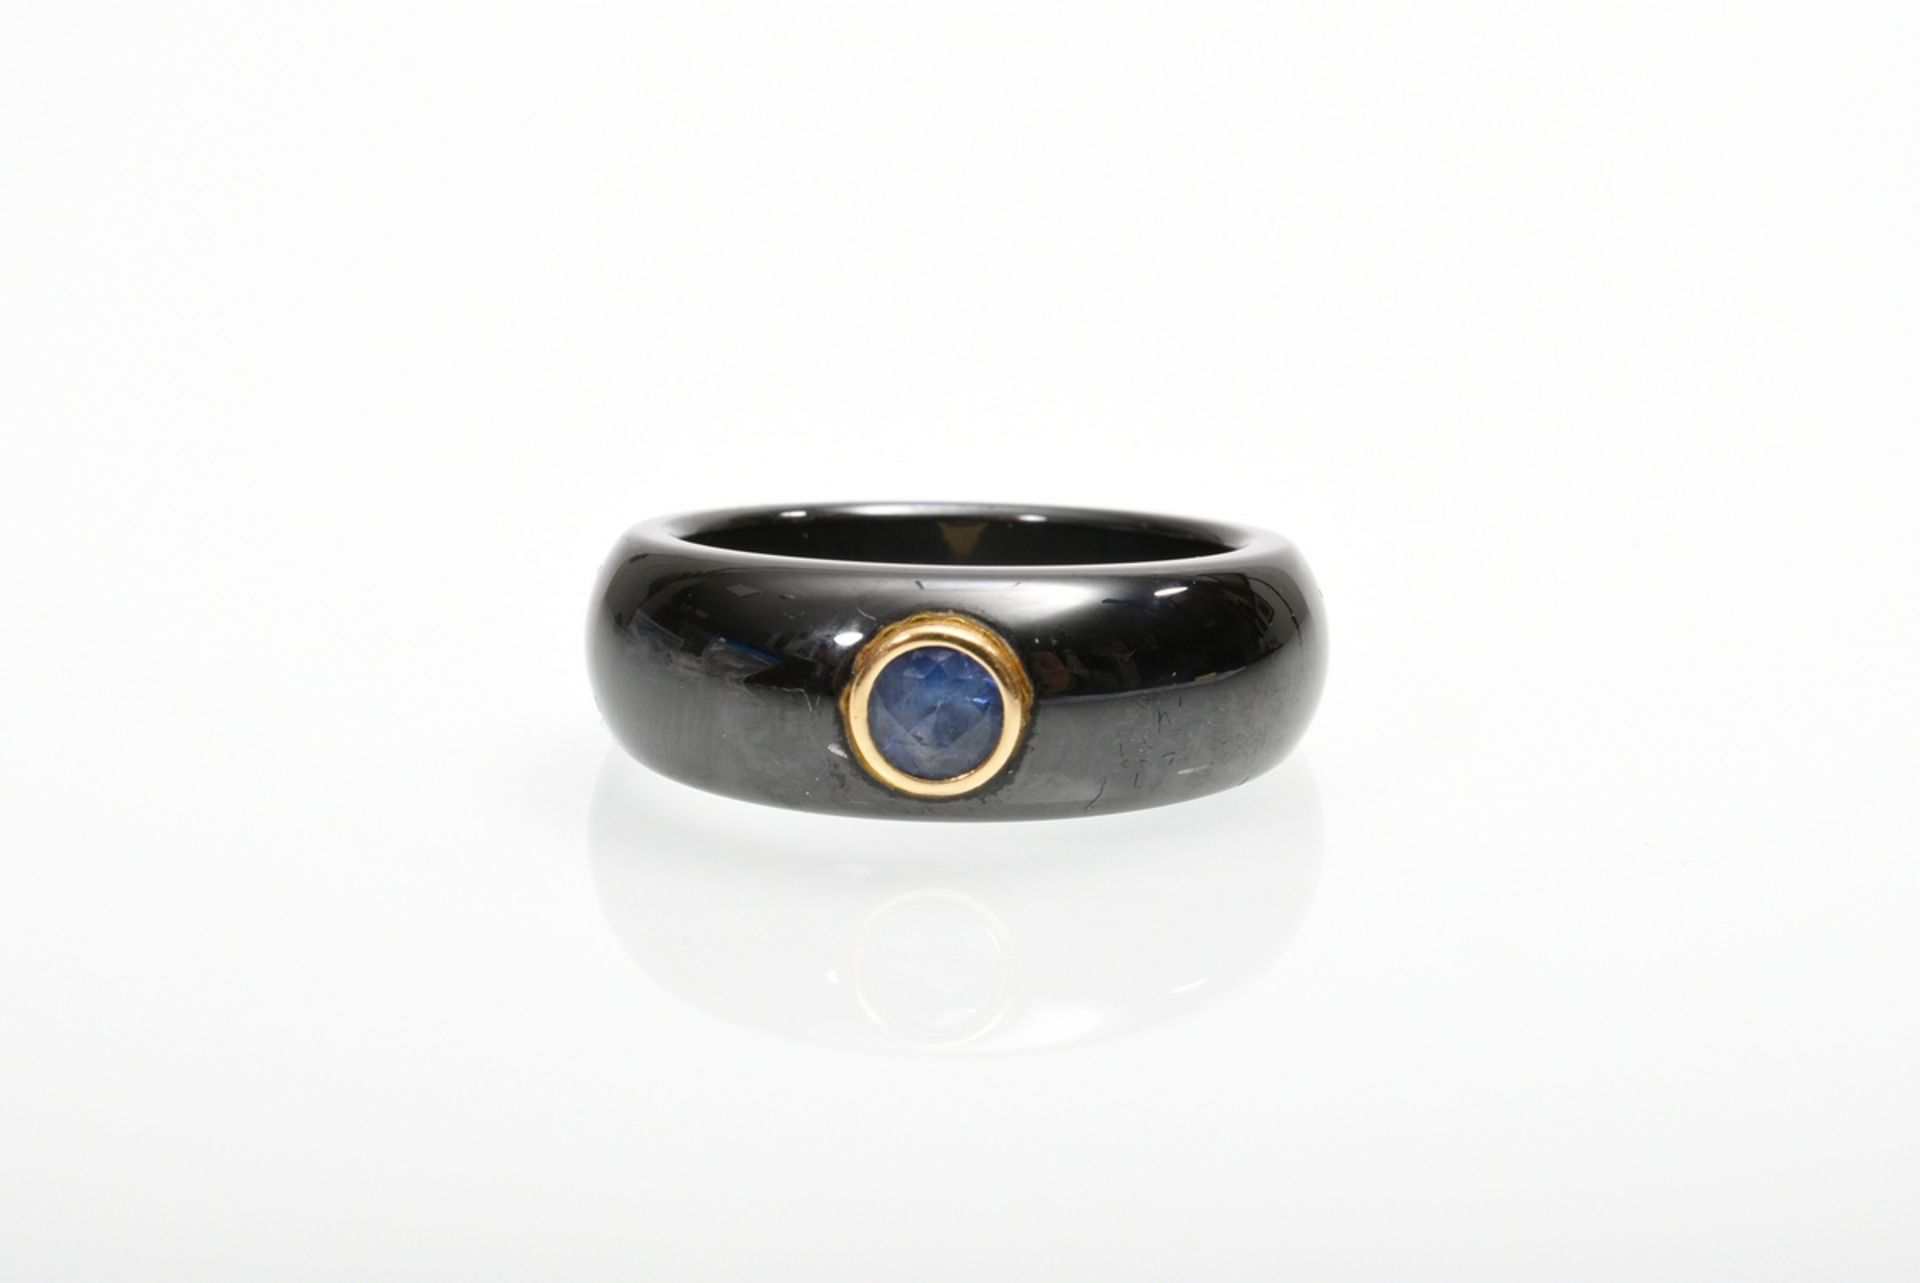 Carbon ring with polished surface and set sapphire in yellow gold 750 bezel setting, 6g, size 54 - Image 3 of 4